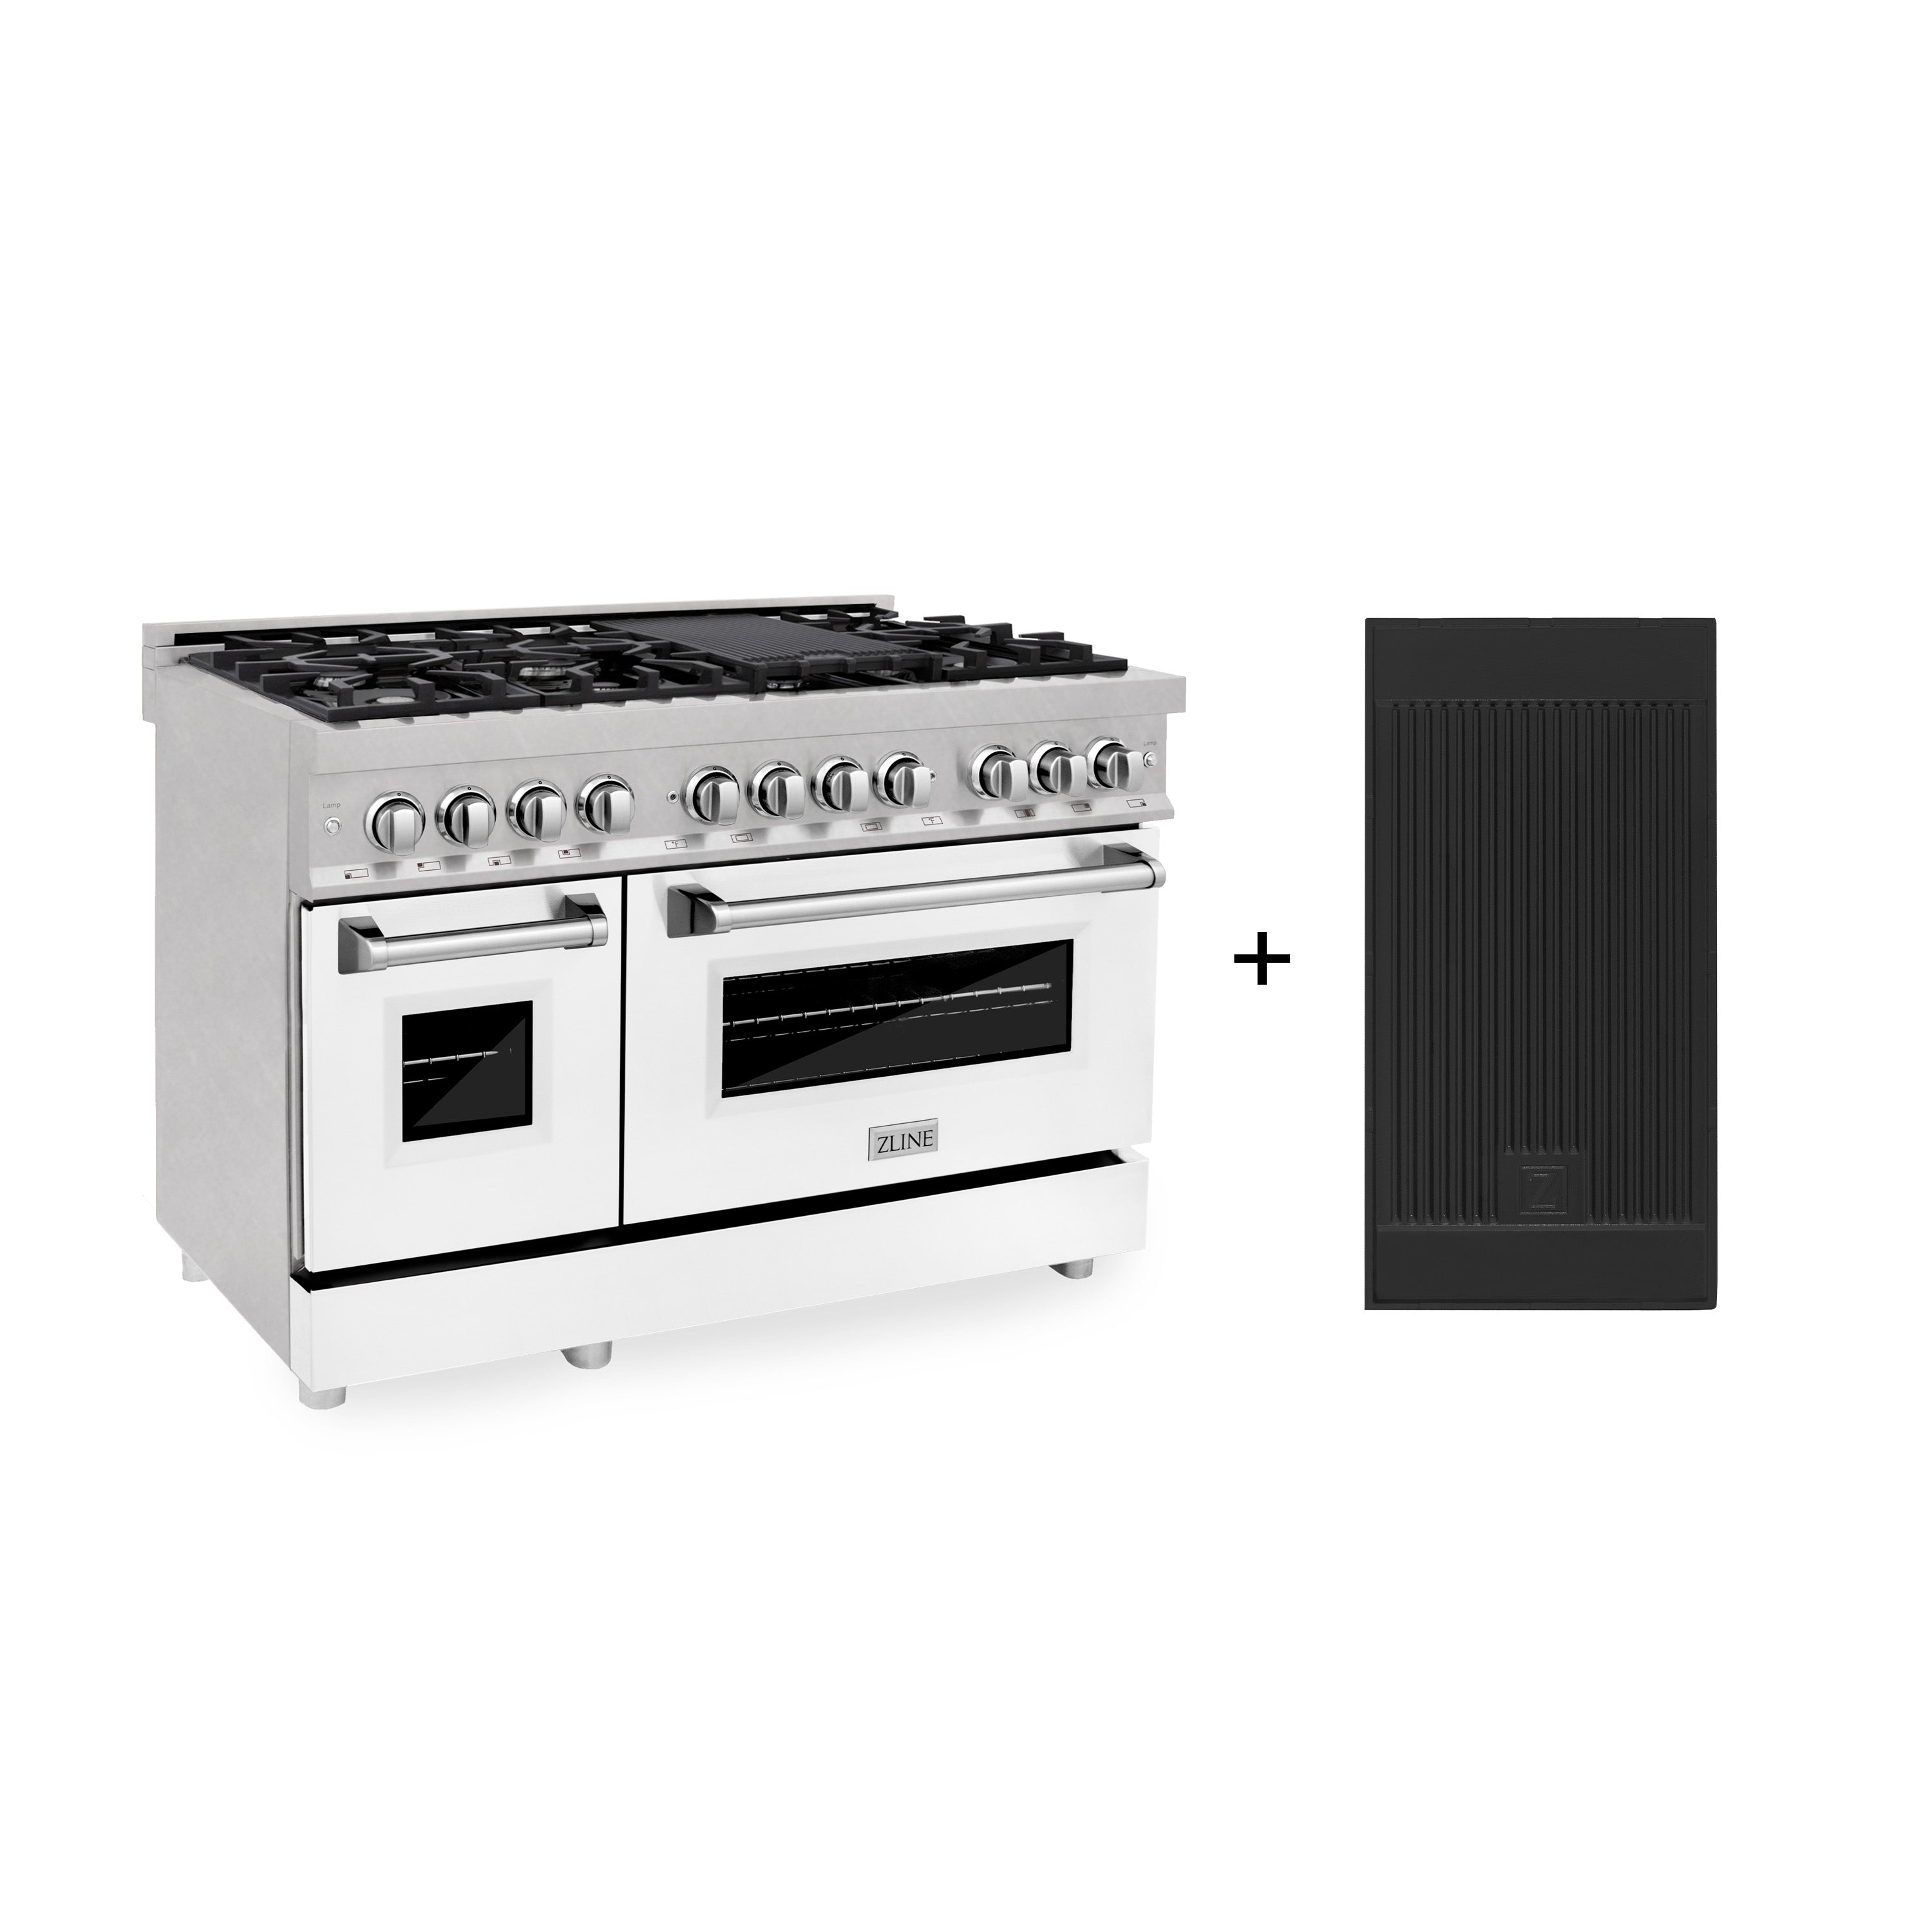 ZLINE 48" 6.0 cu. ft. Electric Oven and Gas Cooktop Dual Fuel Range with Griddle and White Matte Door in Fingerprint Resistant Stainless (RAS-WM-GR-48)